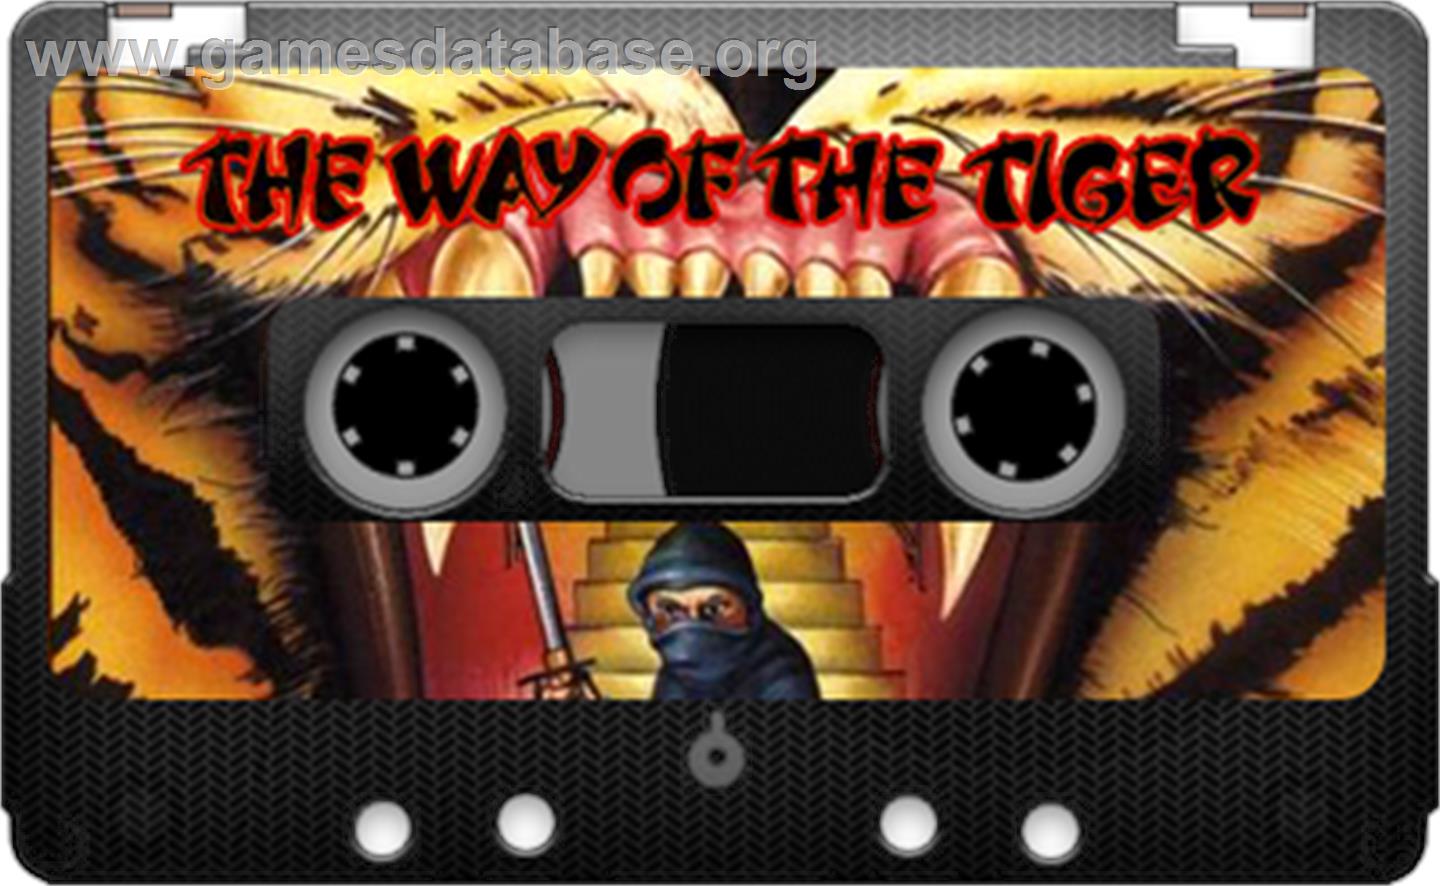 The Way of the Tiger - Sinclair ZX Spectrum - Artwork - Cartridge